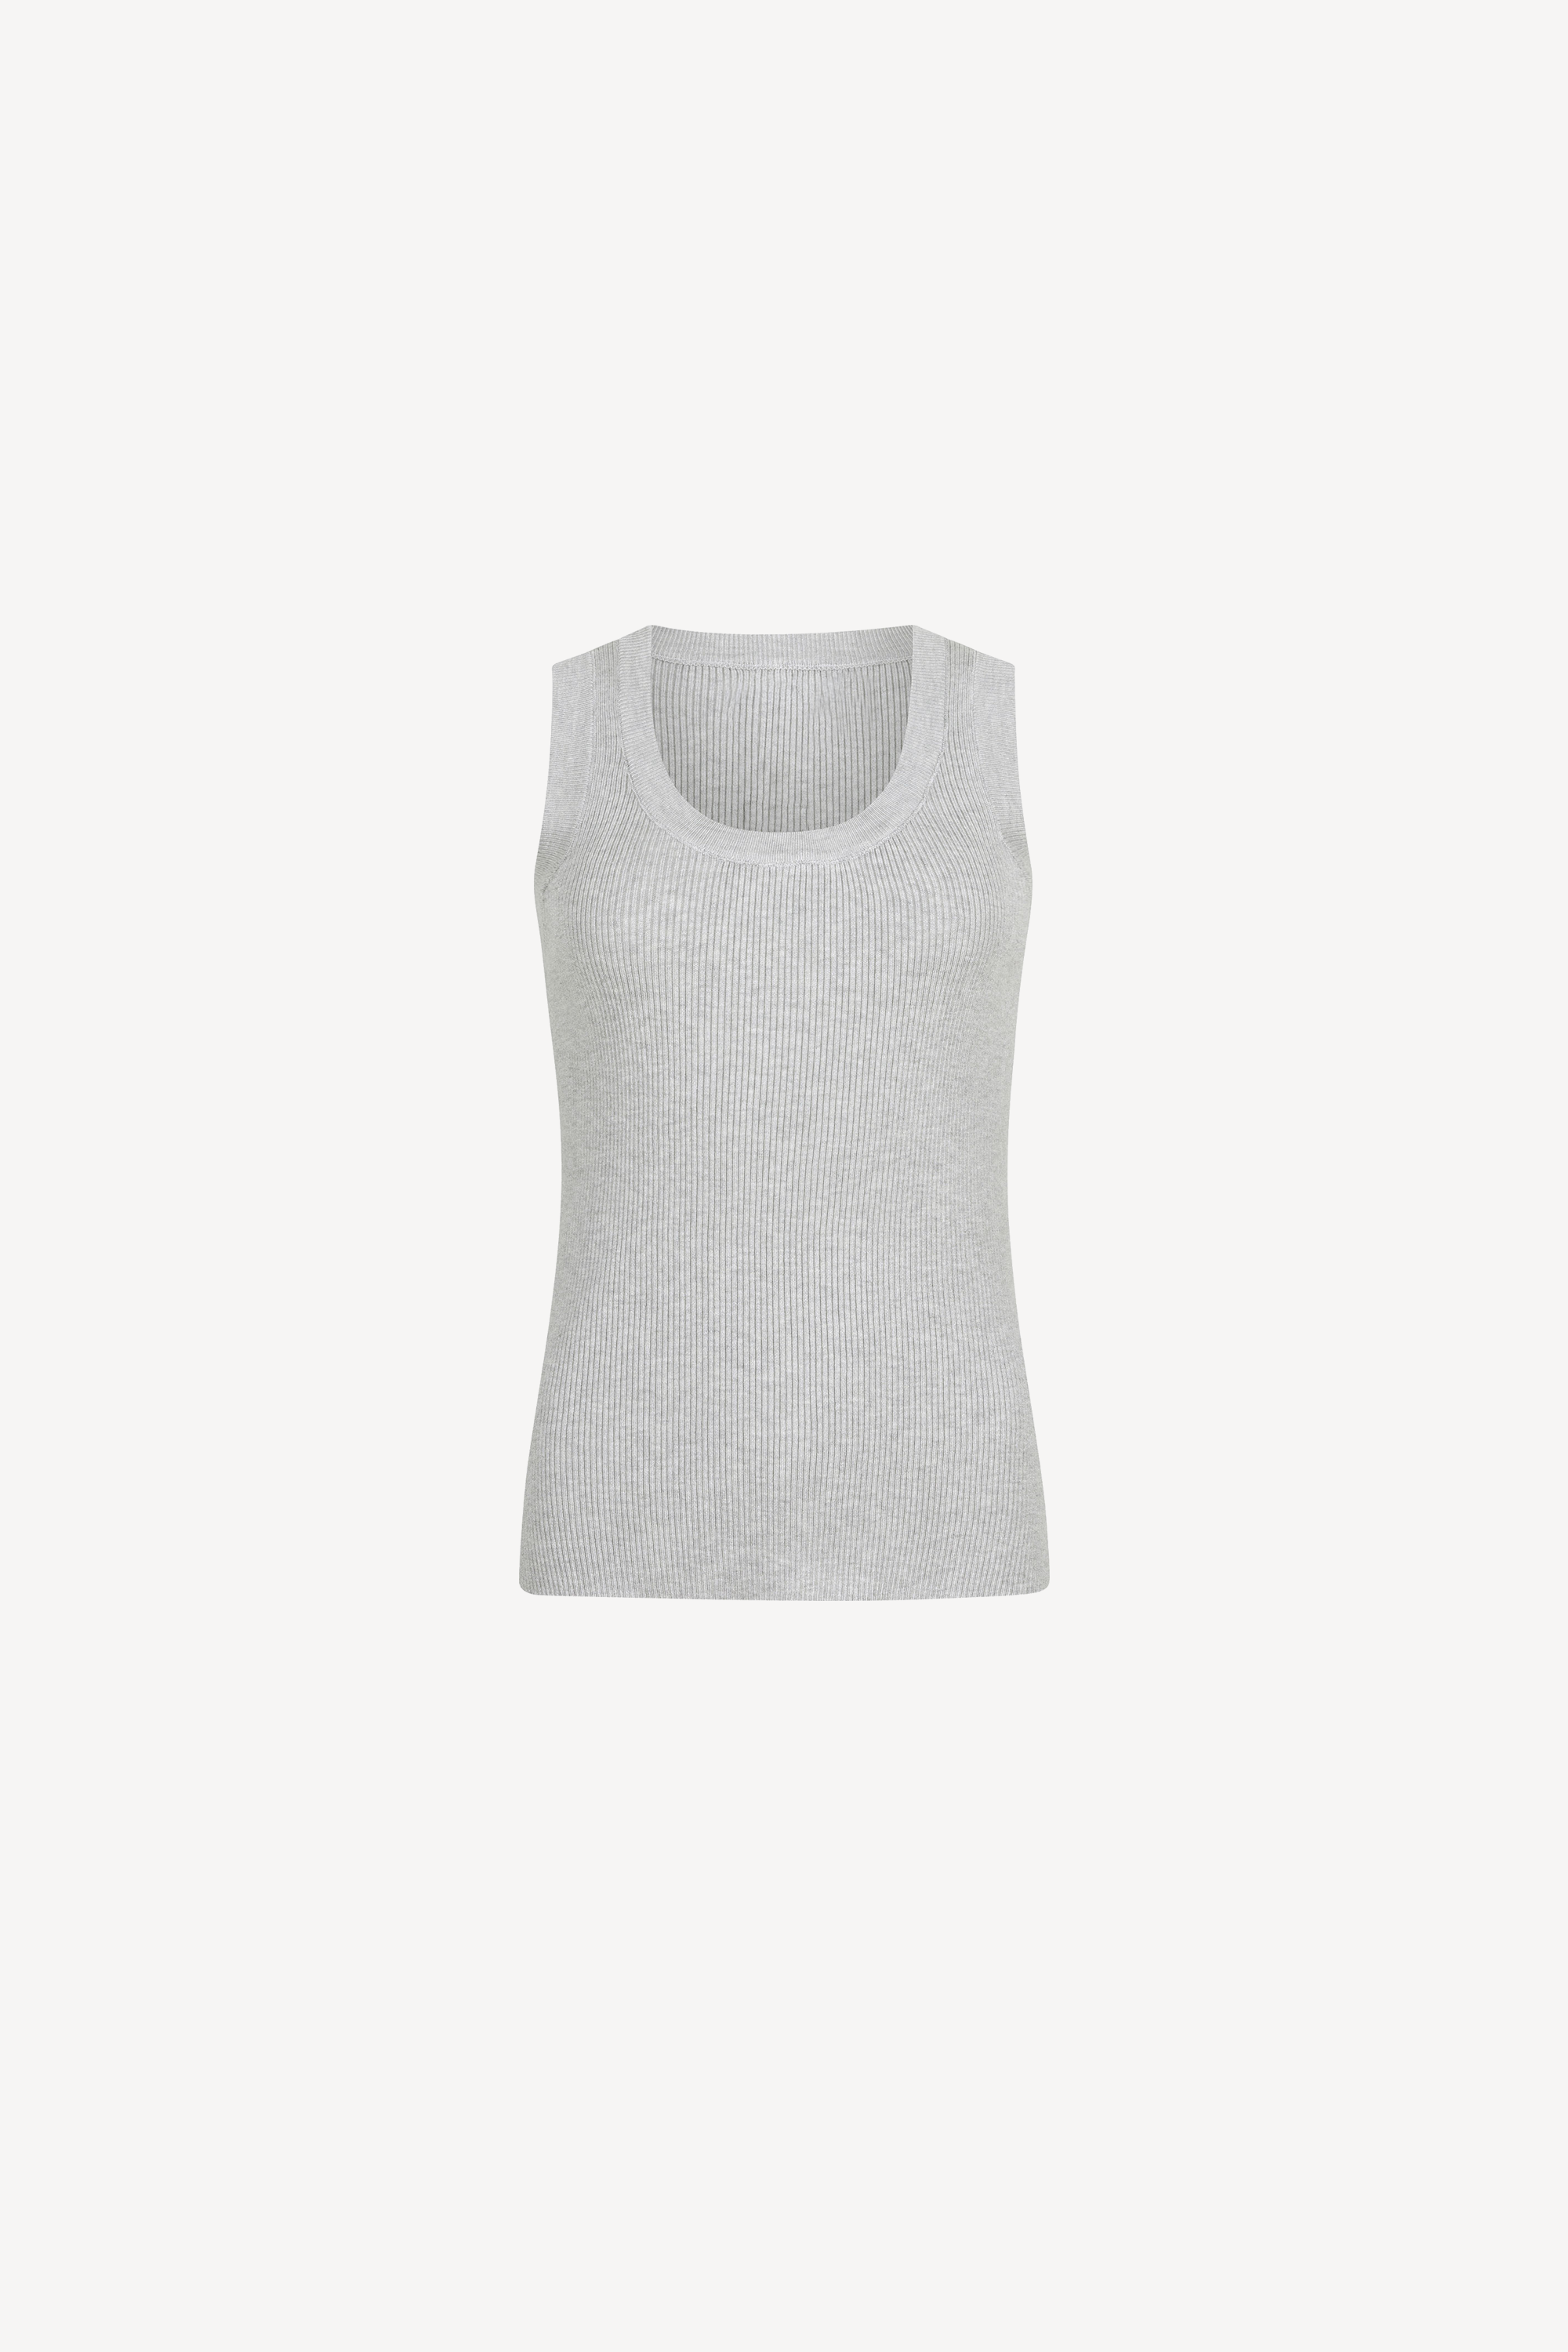 Keely Knitted Top Grey